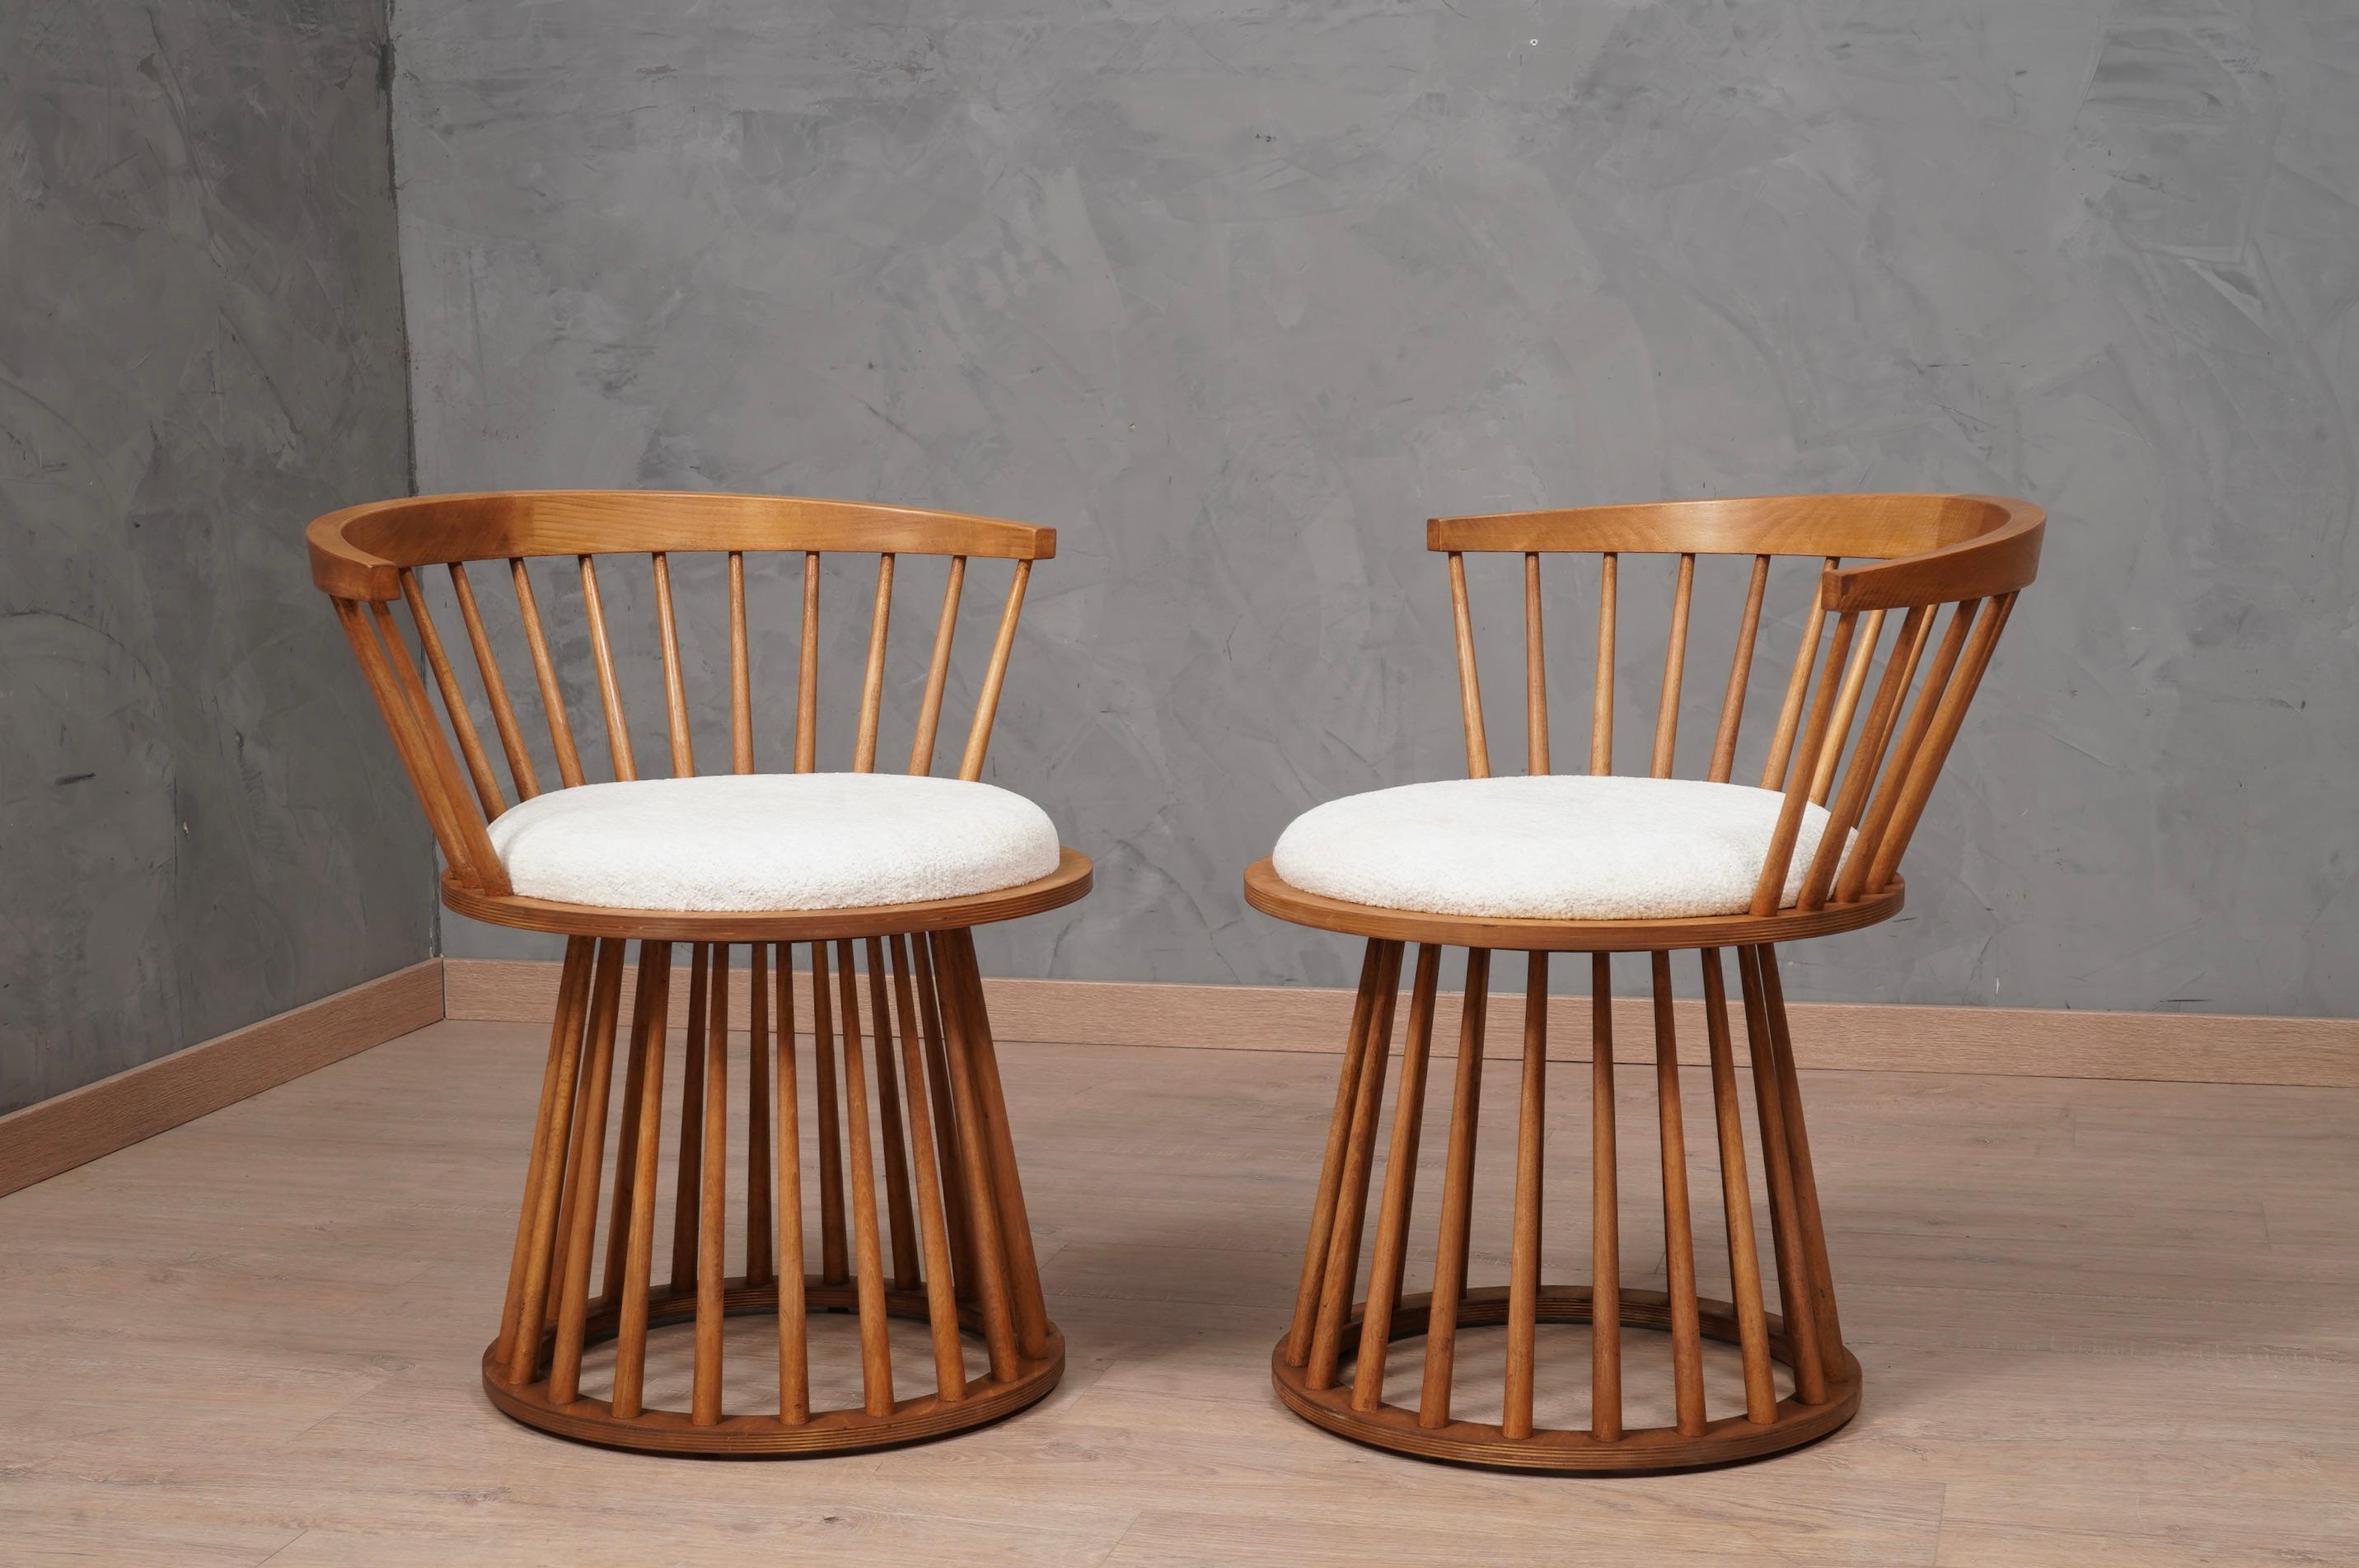 Characteristic circle chair by Italian Style, exciting design made elegant by a beautiful white fabric.

The chair is the classic circle chair by Italian Style, made of beech wood. It has a particular backrest made like the spokes of a bicycle